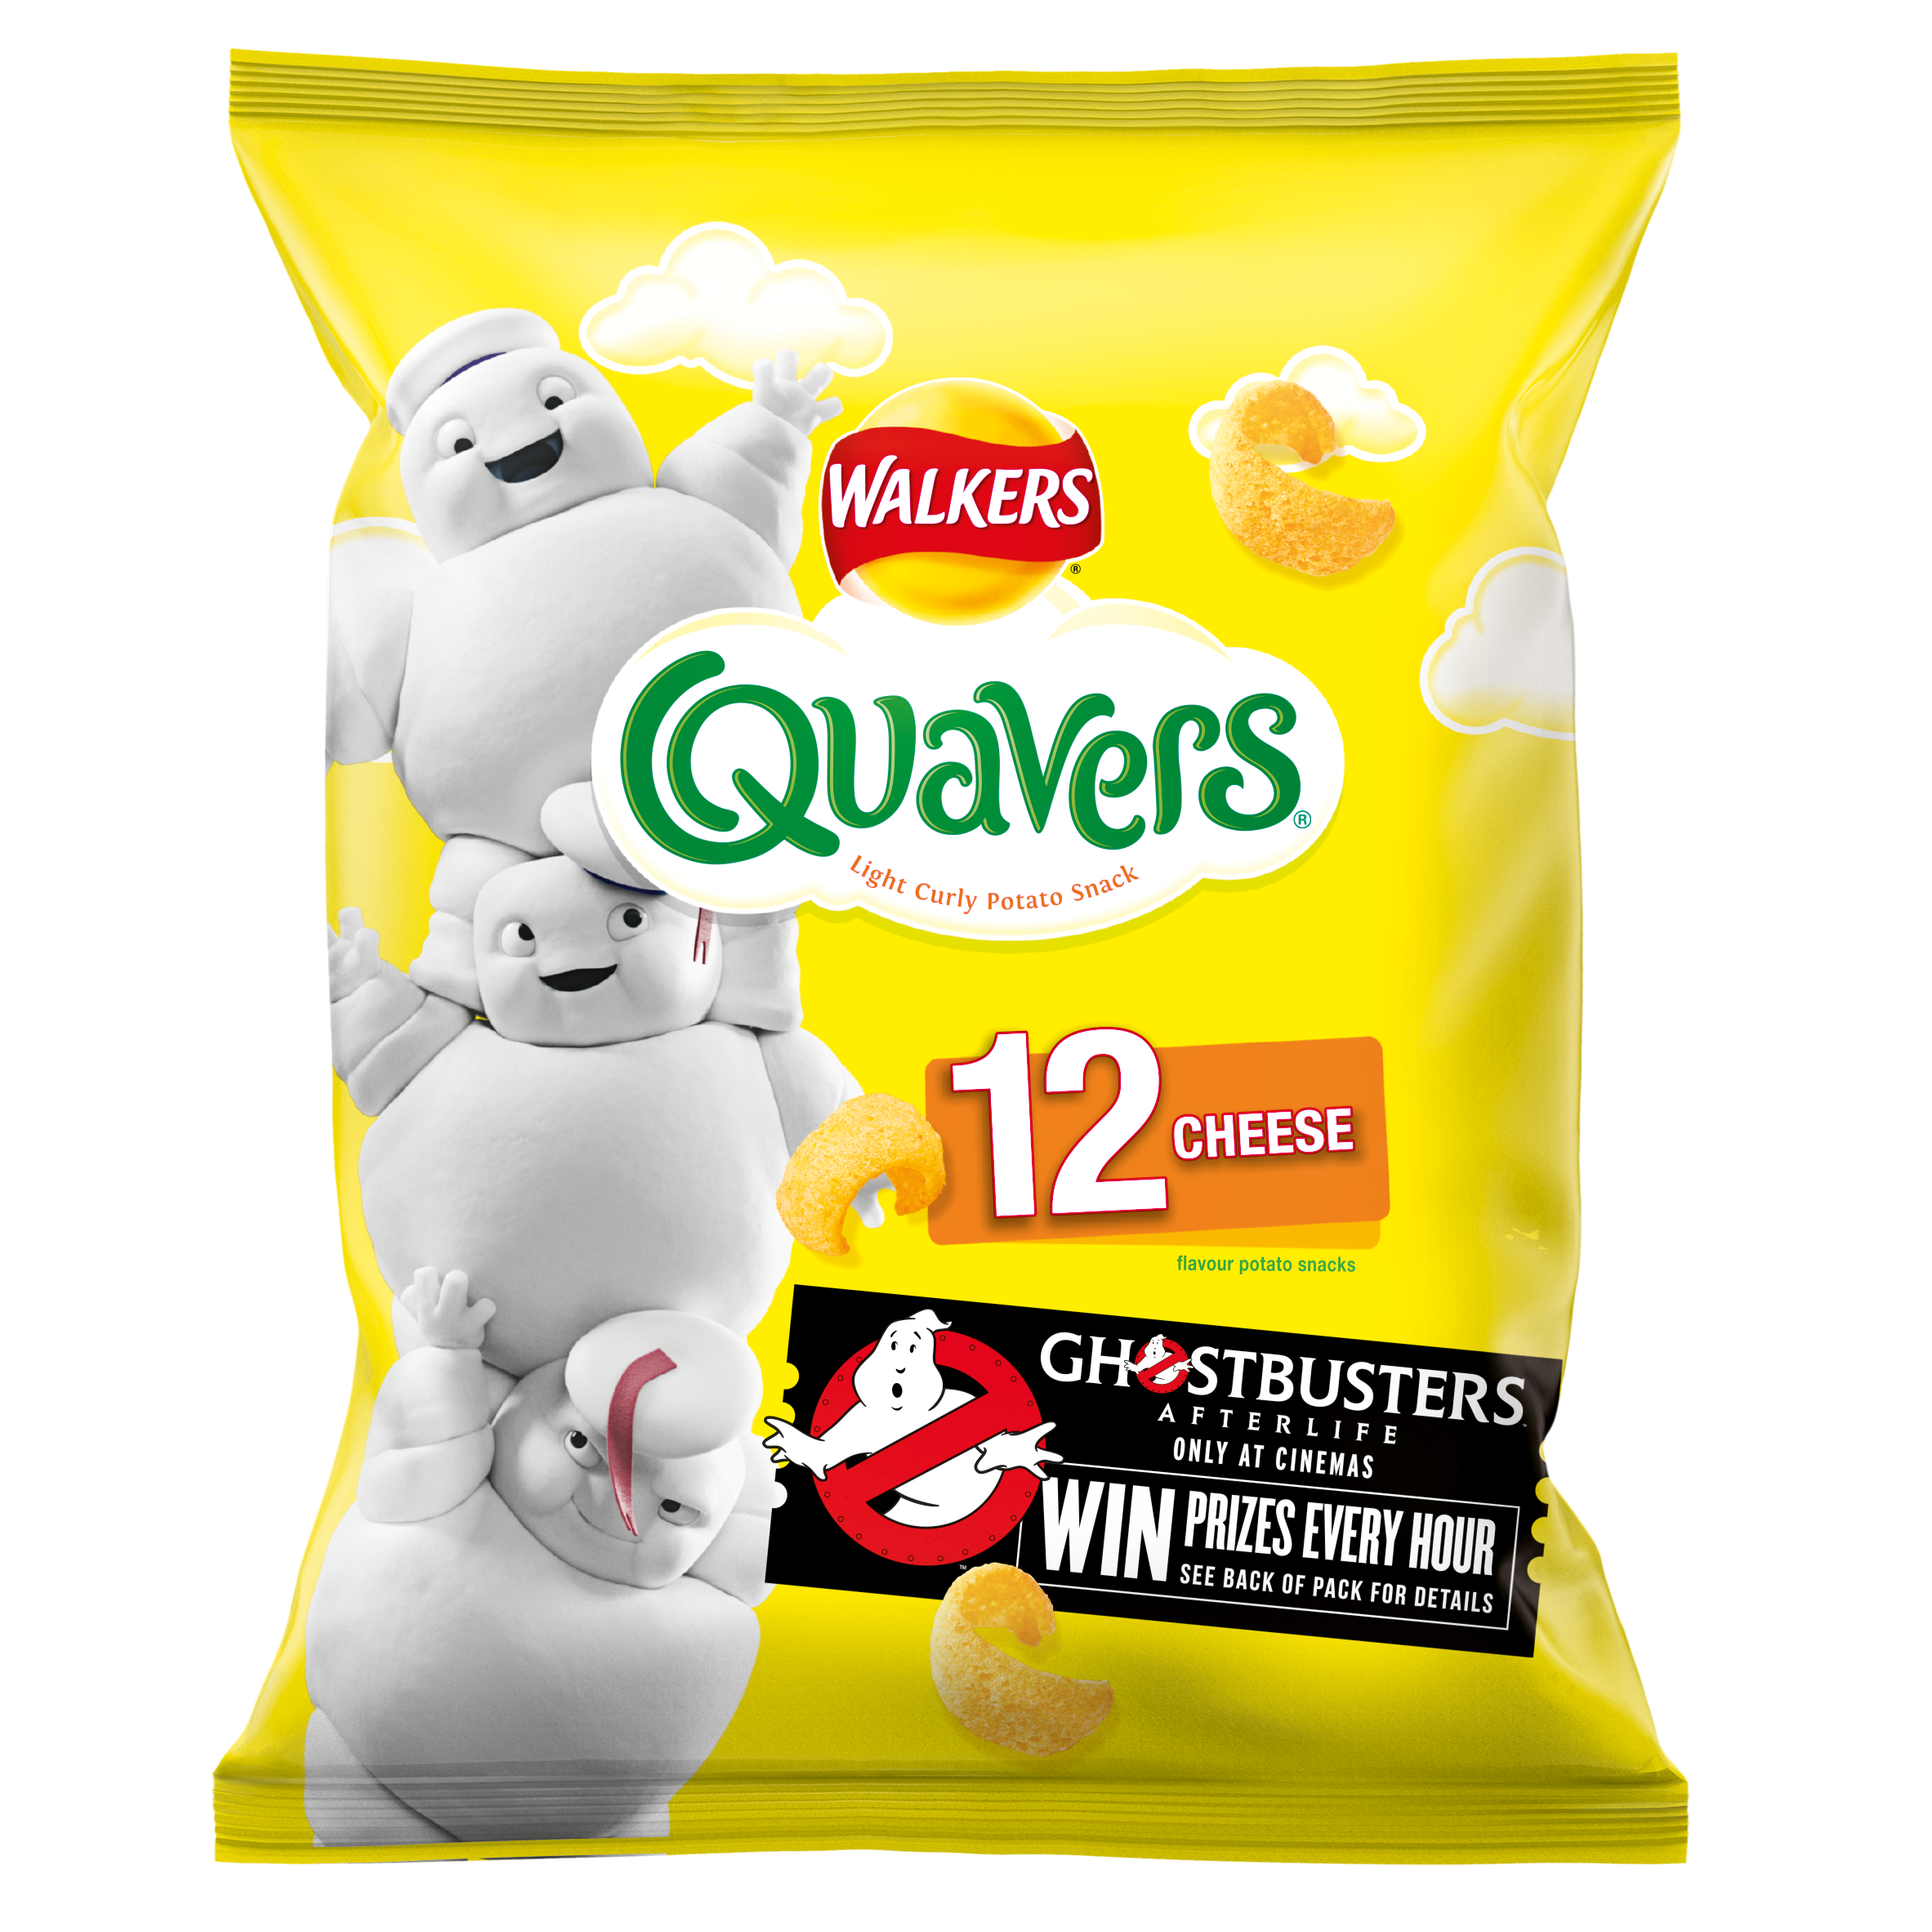 Walker snacks announces Ghostbusters: Afterlife on-pack promotion collaboration